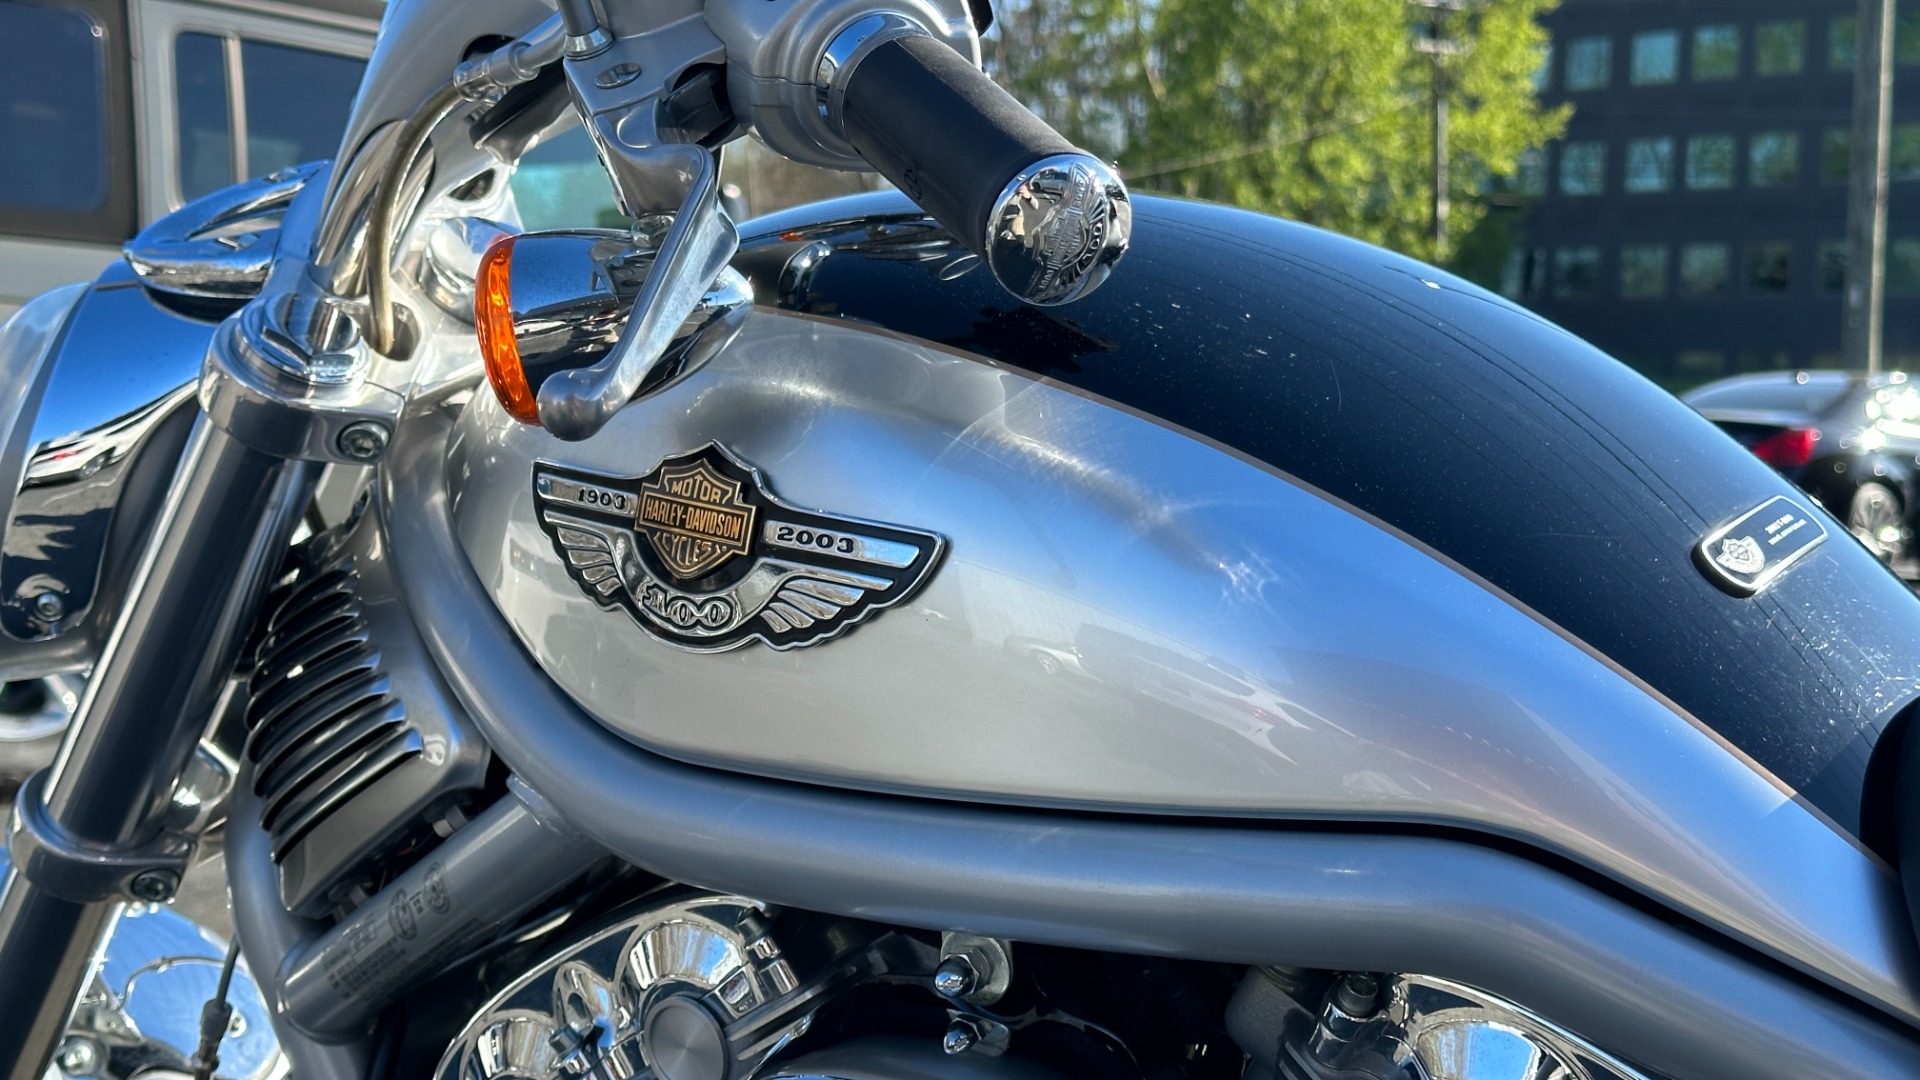 Used 2003 Harley Davidson V Rod ANNIVERSARY EDITION / 1130CC ENGINE / BREMBO BRAKES / VORTEX AIR SCOOPS for sale Sold at Formula Imports in Charlotte NC 28227 41